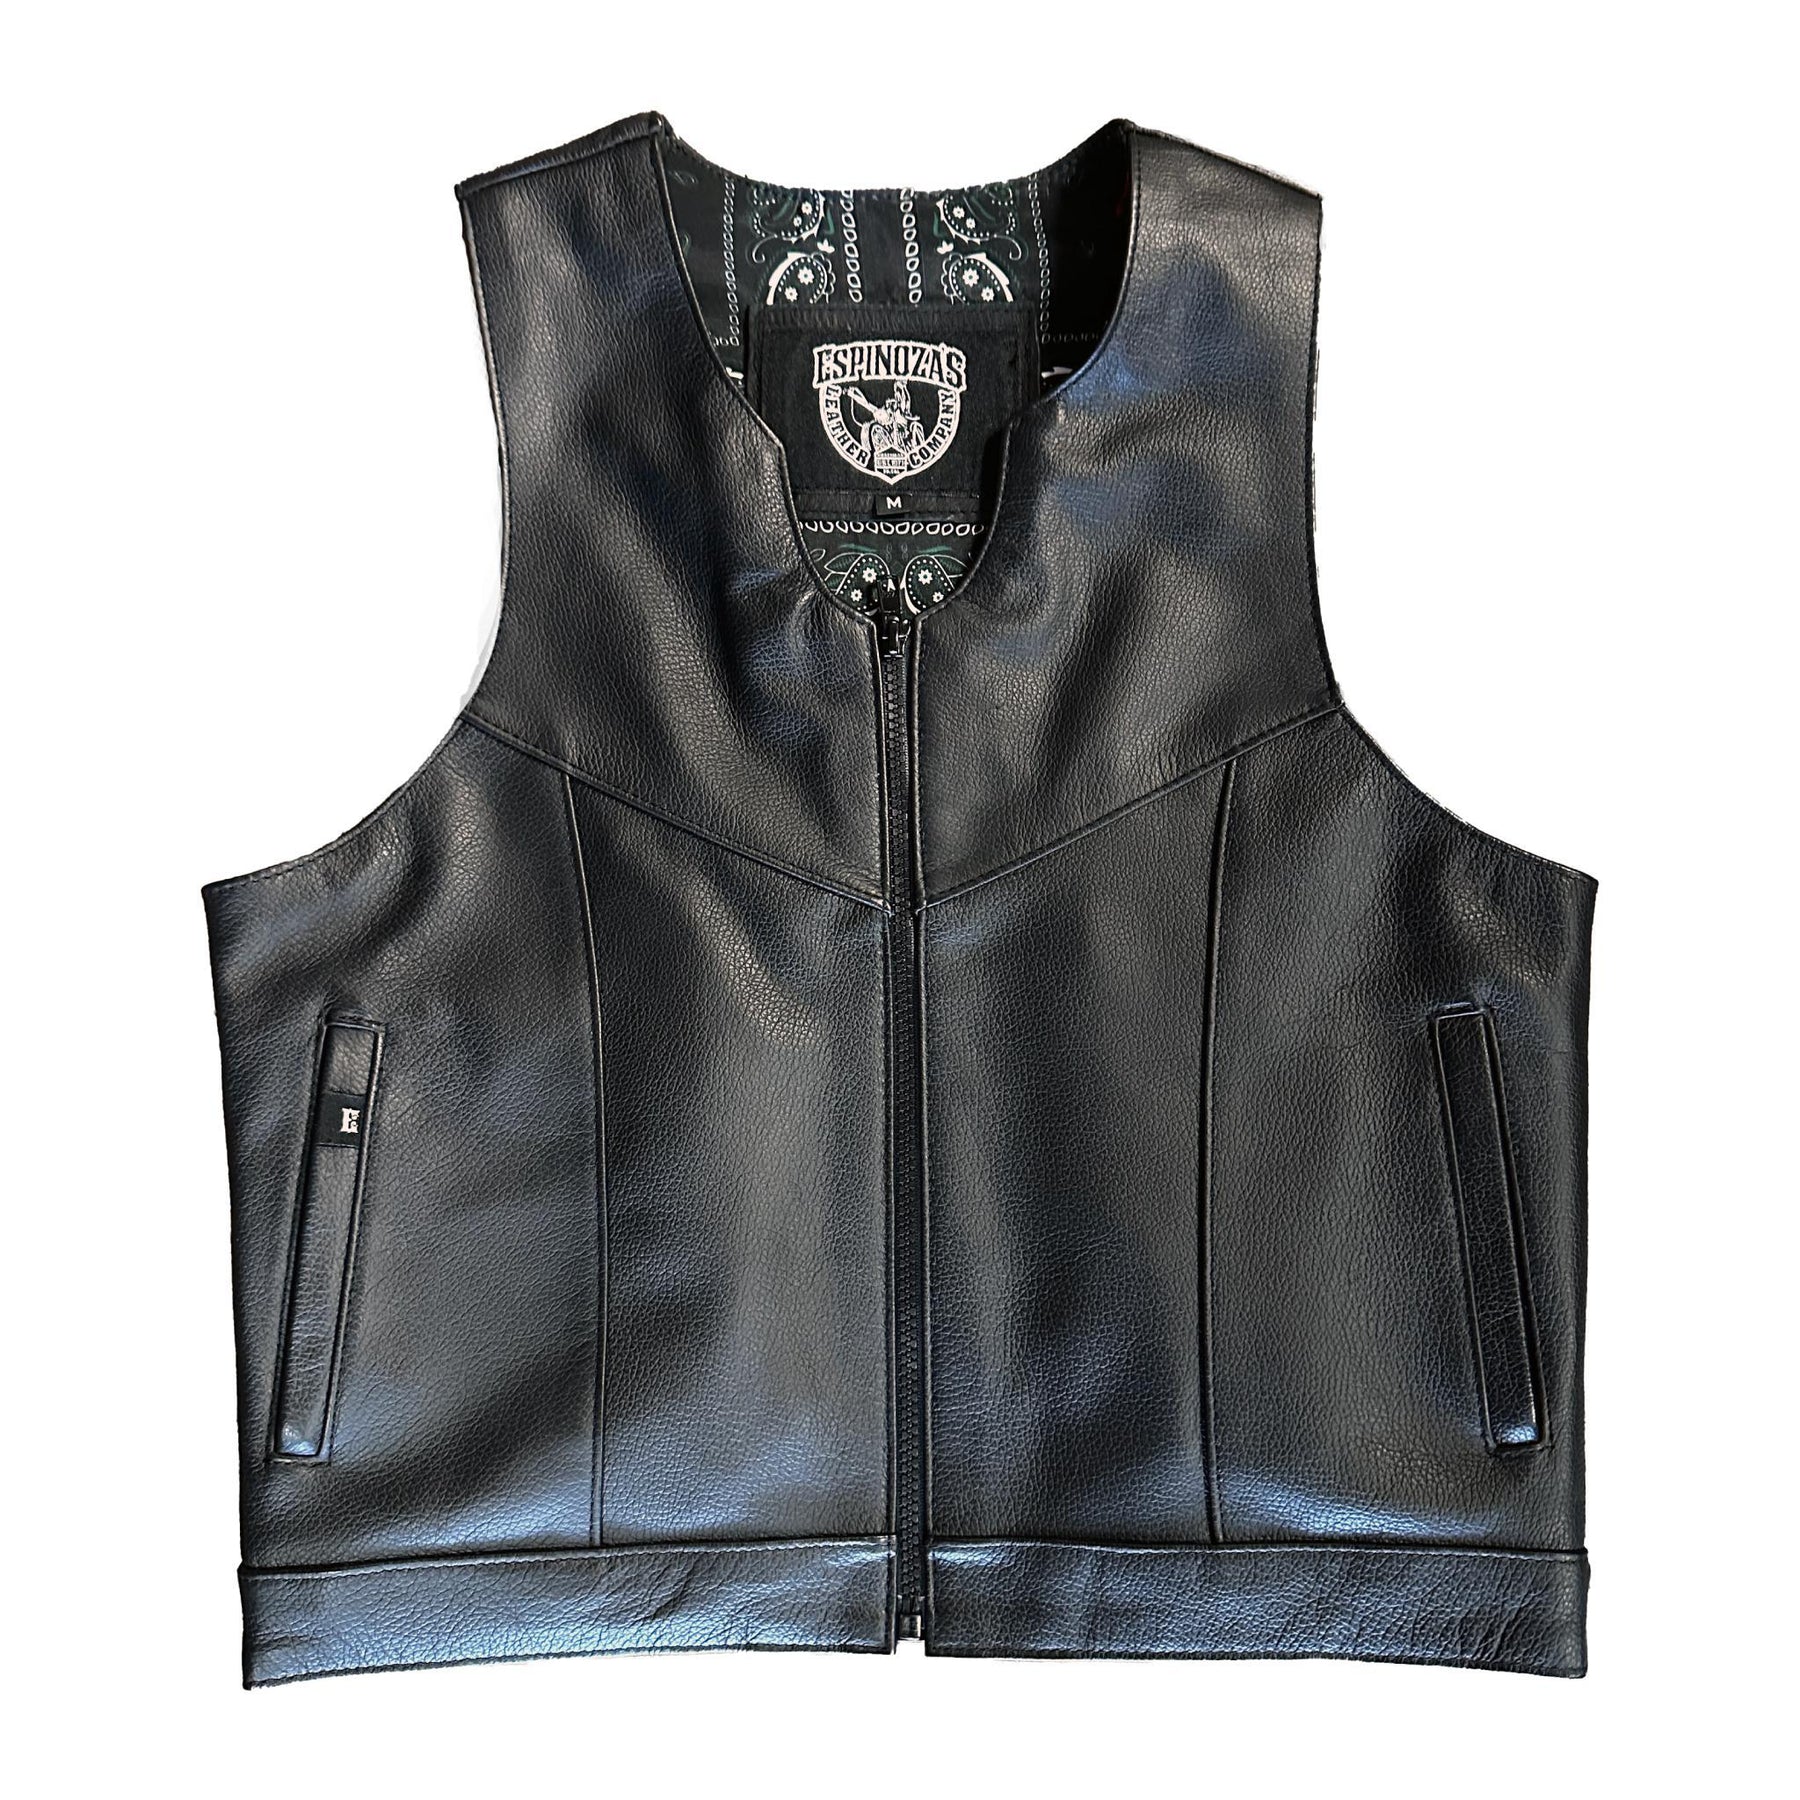 Espinoza's Leather - Perforated Cowhide/ Woodland Camo Cordura Baller  Vest🔥 order yours today in store or online at www.espinozasleather.com  #espinozasleather #madeinusa #losangeles #handmade #custom #leather #camo  #baller #vest